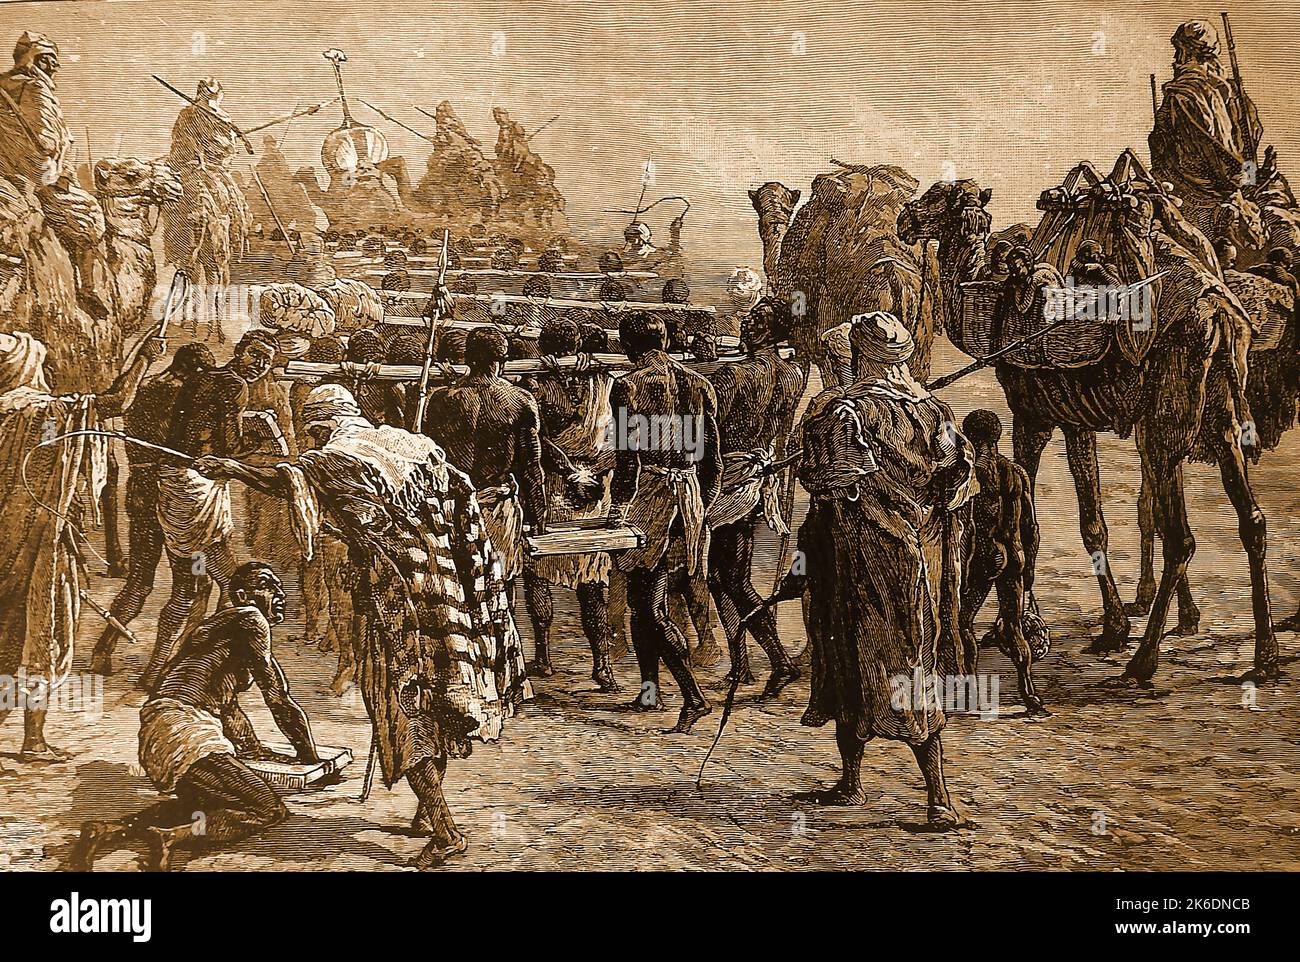 An 1890's illustration of an African gang of slave traders on the move with captured slaves Stock Photo